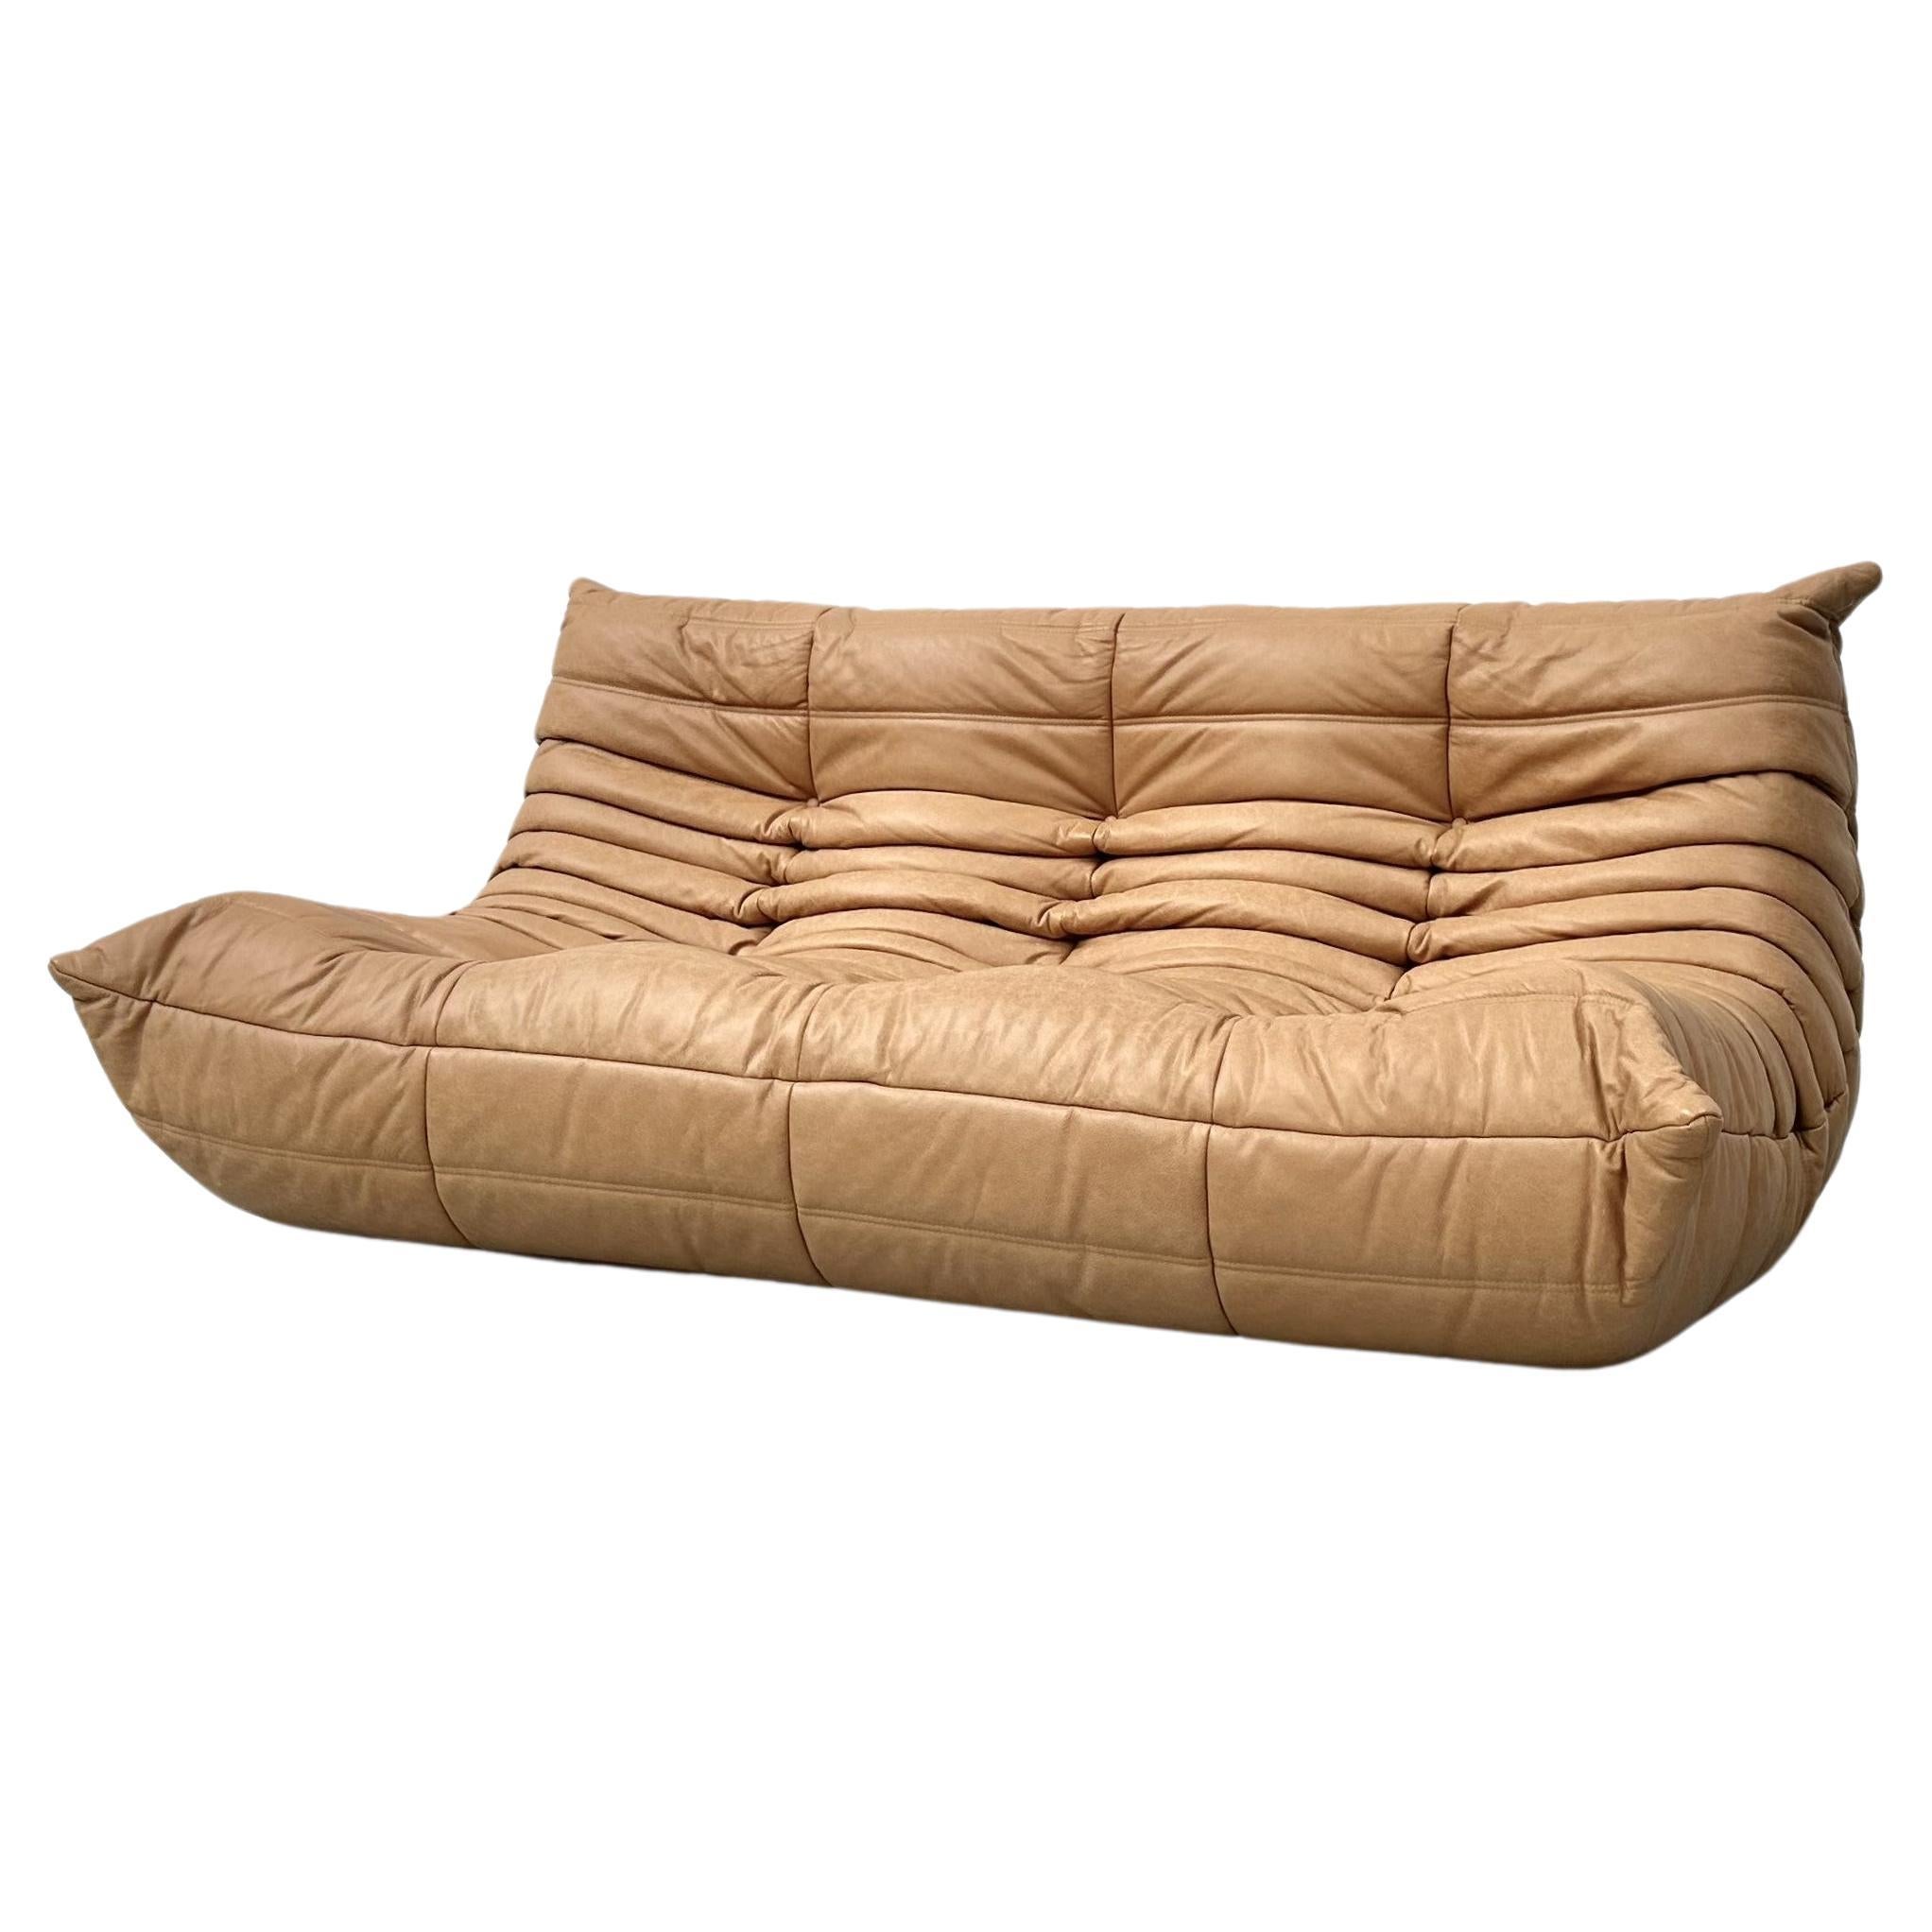 French Togo Sofa in Camel Leather by Michel Ducaroy for Ligne Roset. For Sale